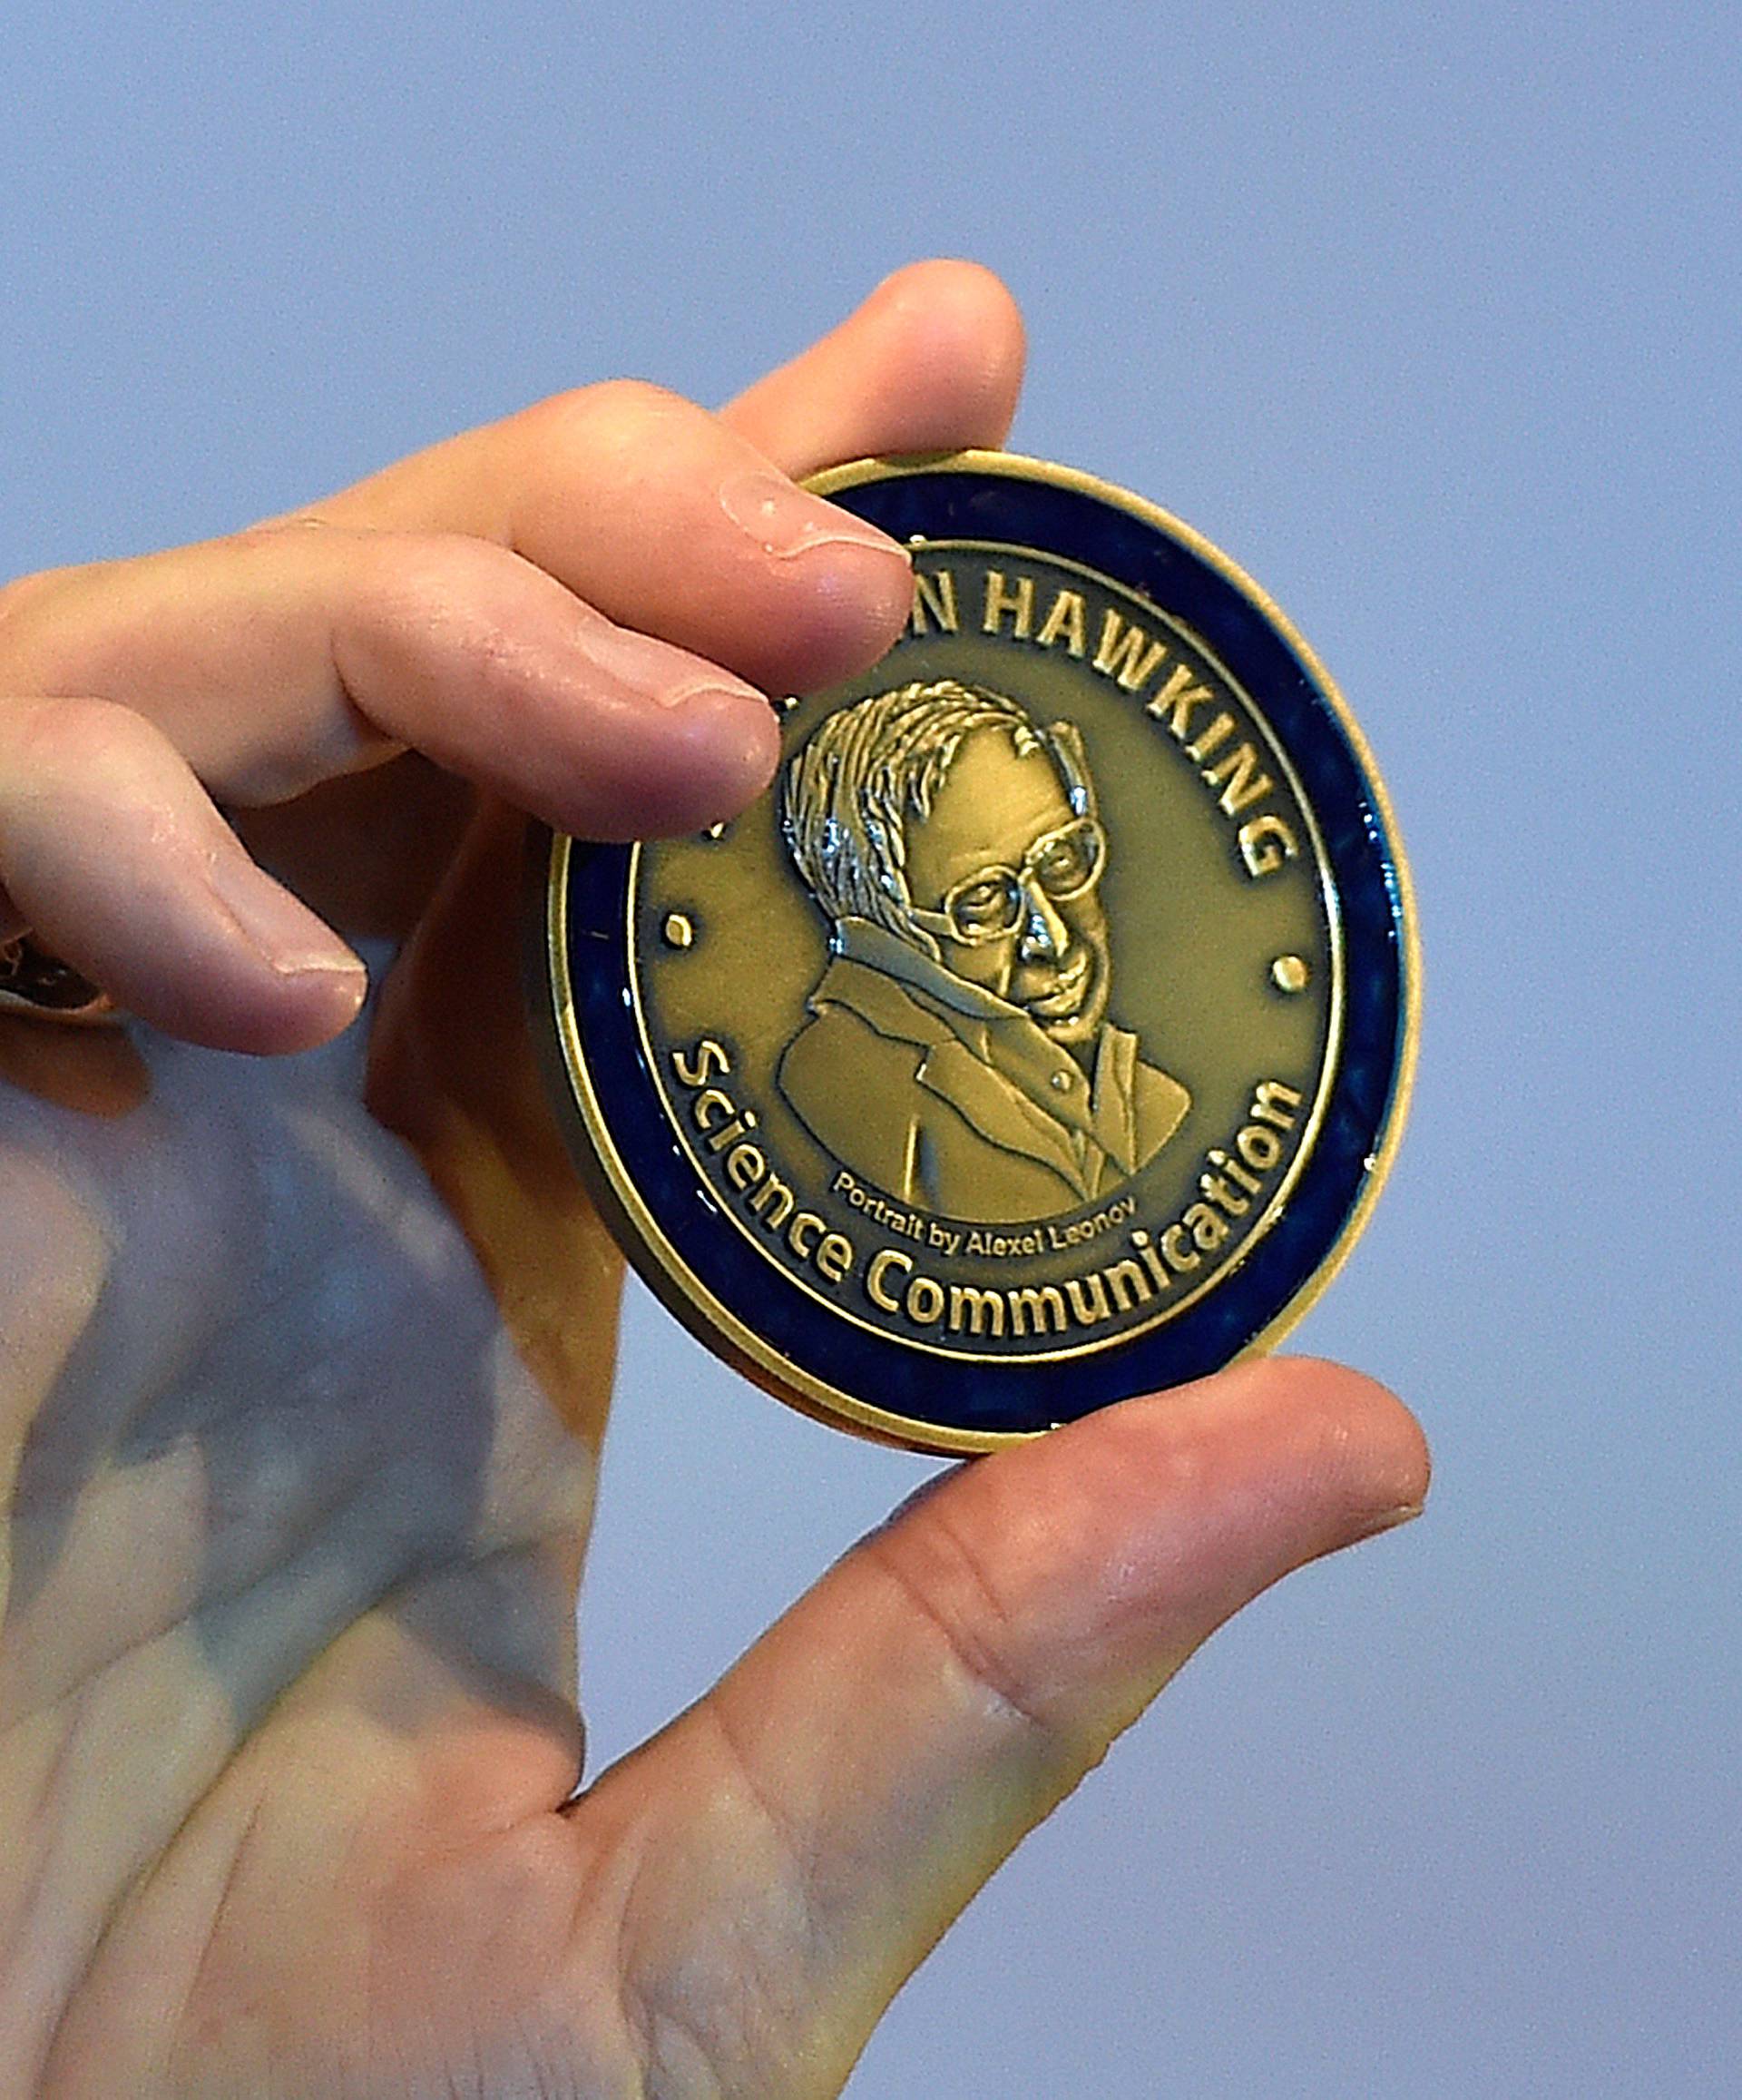 FILE PHOTO: British musician and astrophysicist May holds a medal as he attends a launch event for a new award for science communication, called the Stephen Hawking Medal for Science Communication, in London in Britain